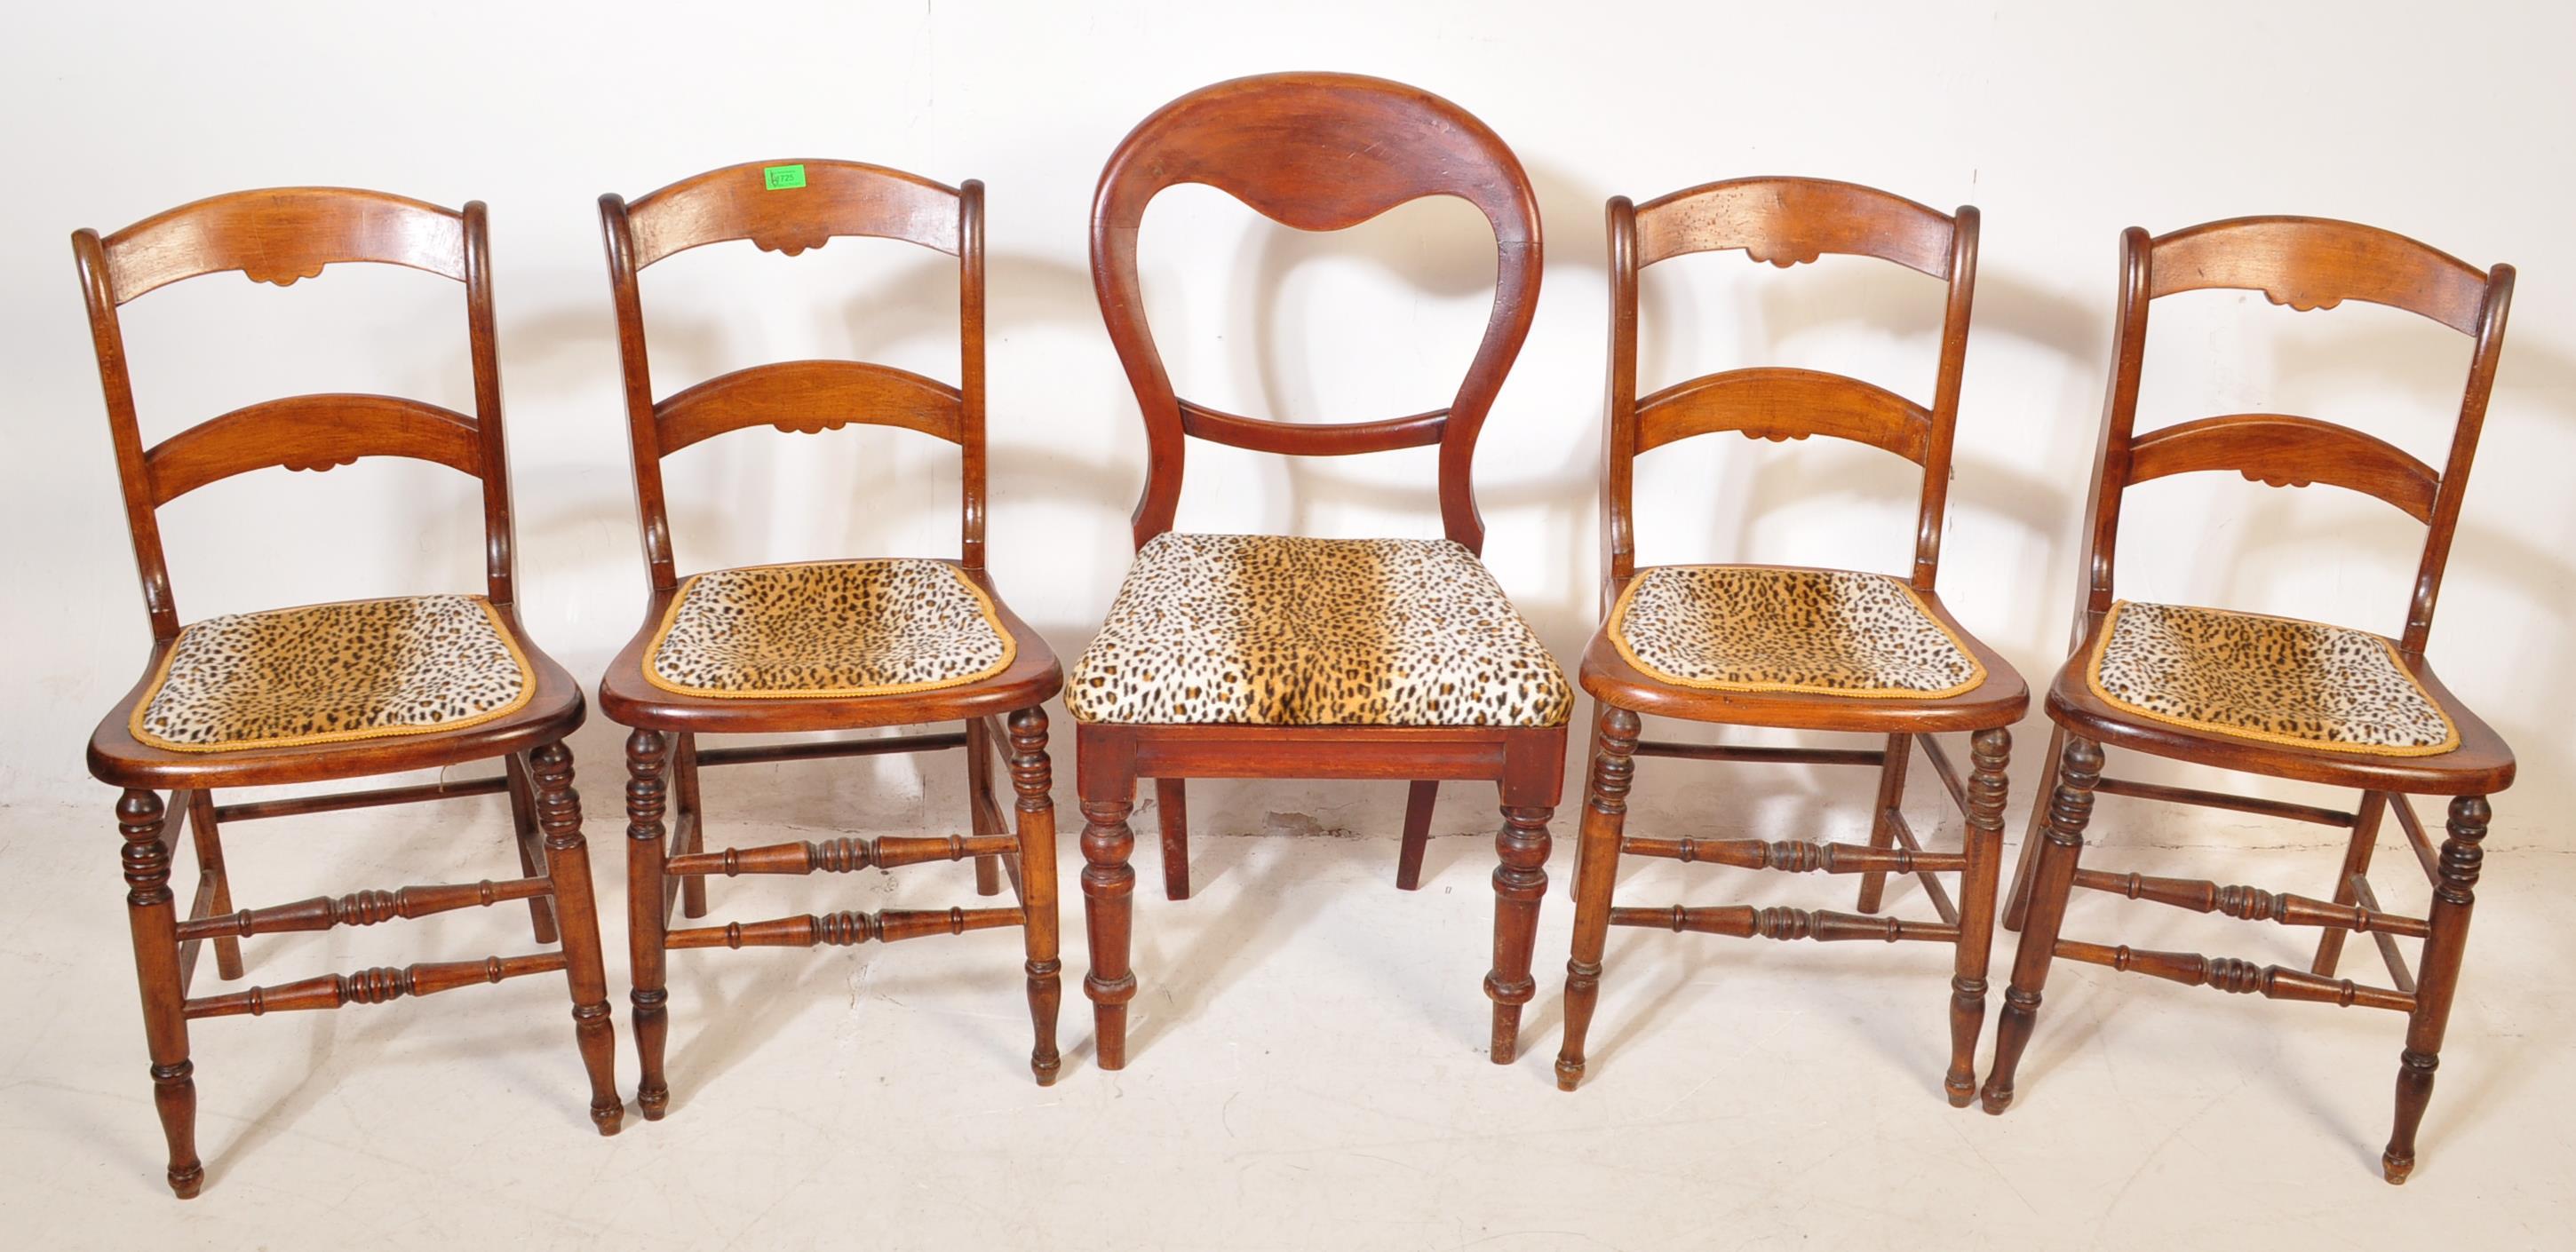 HARLEQUIN COLLECTION OF 19TH CENTURY VICTORIAN DINING CHAIRS - Image 2 of 10